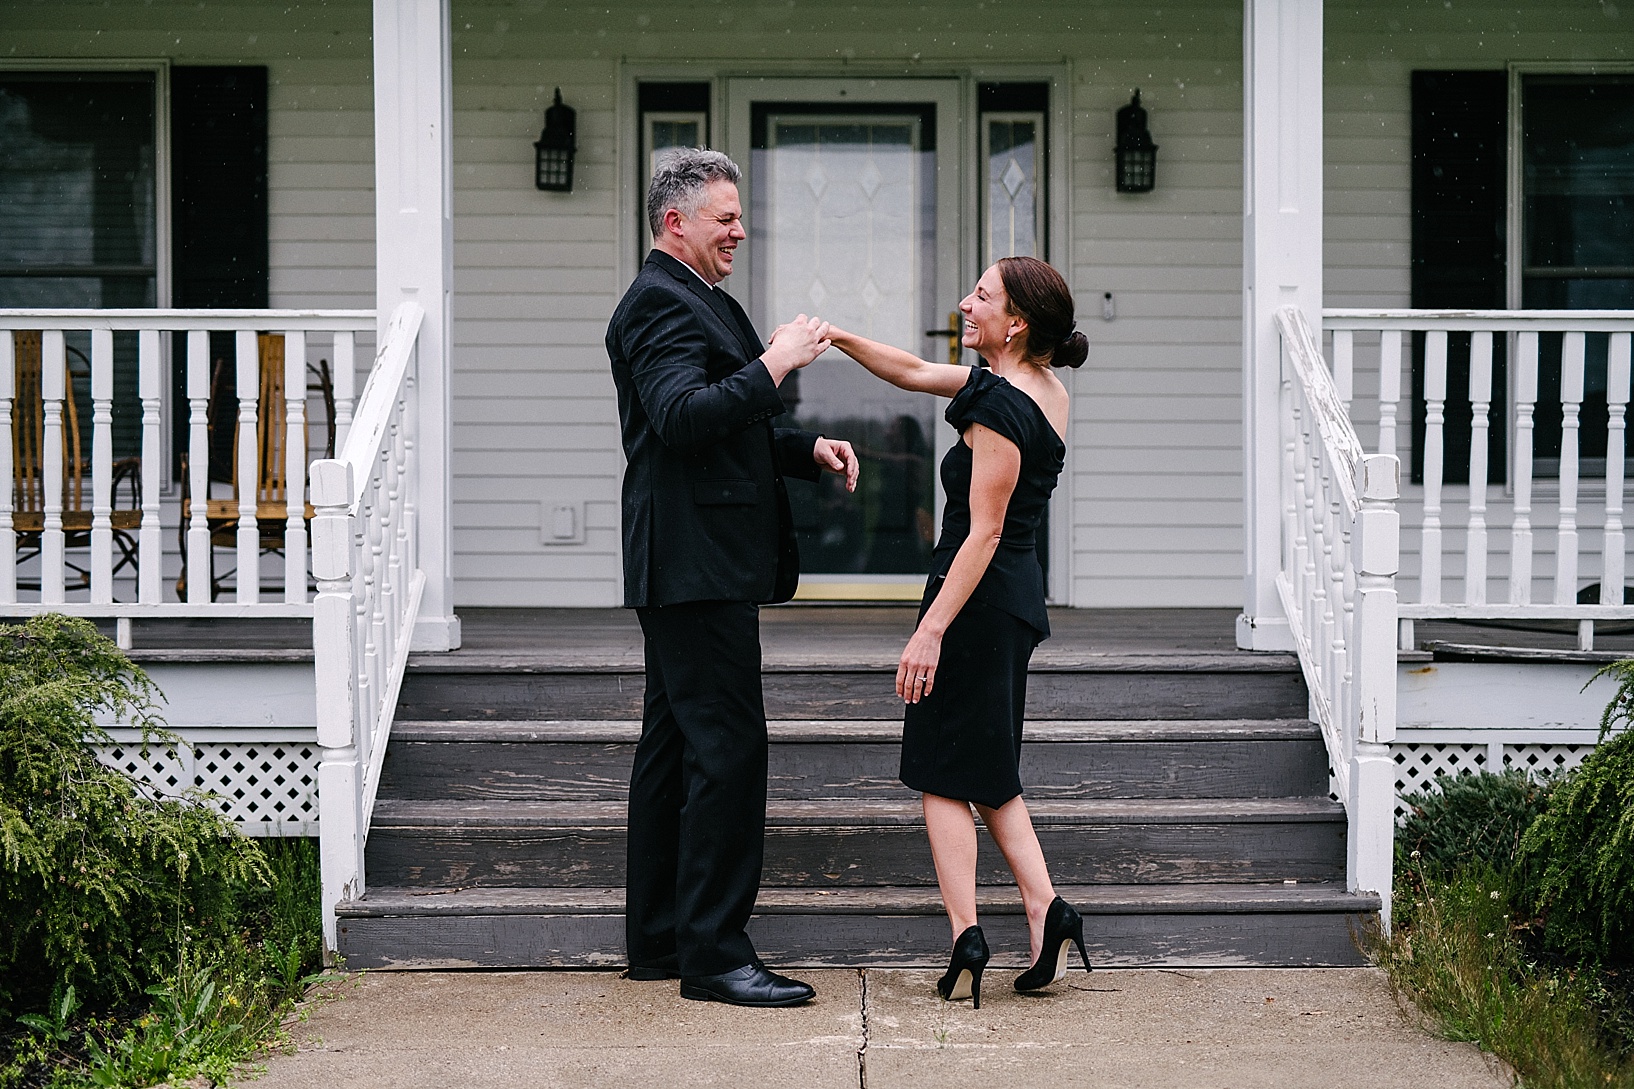 couple in formal attire dancing in front of porch